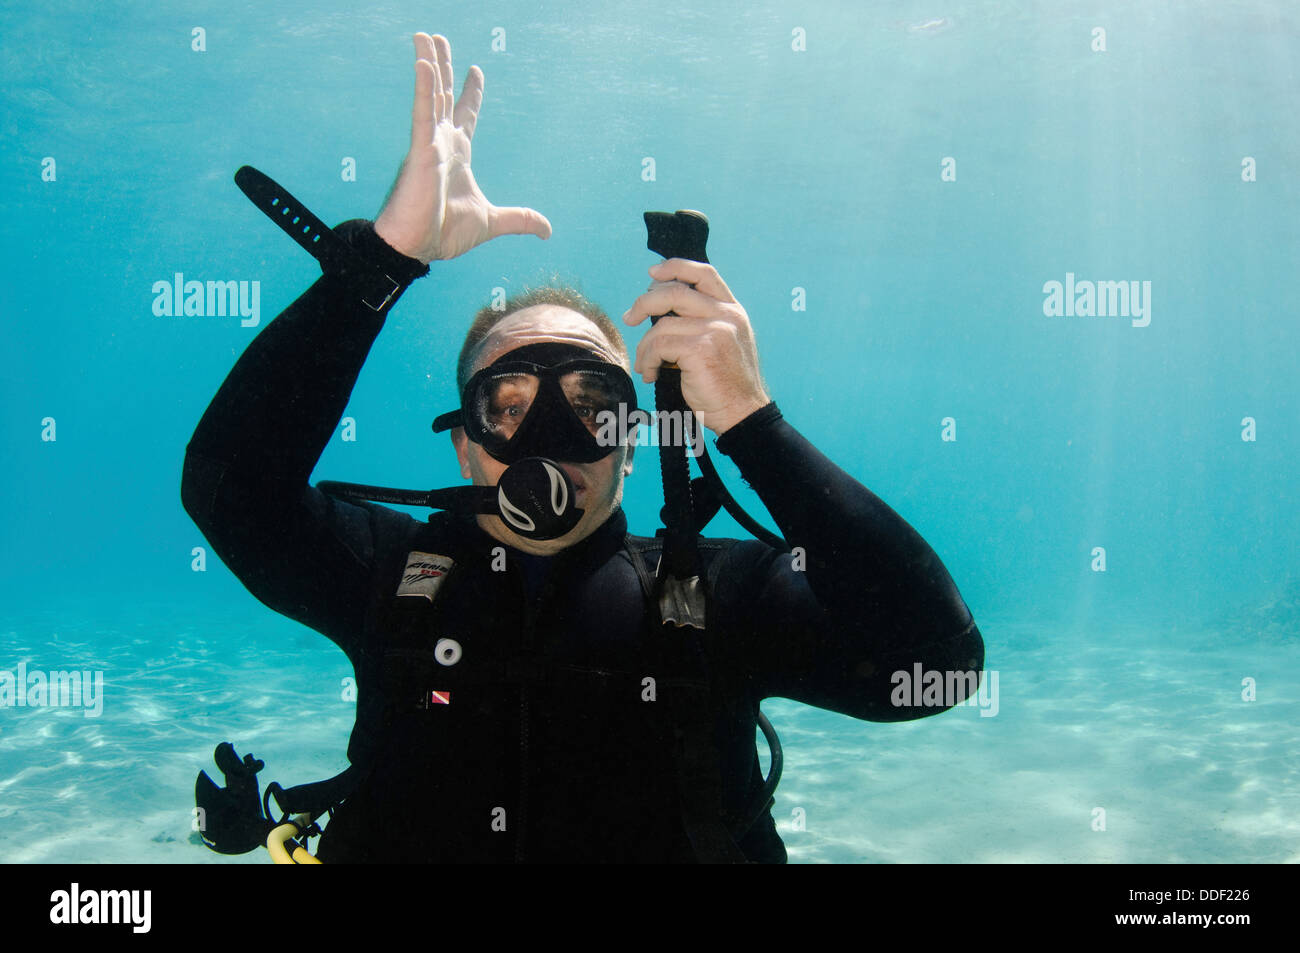 Deflate Buoyancy compensator Underwater Hand signs scuba diver demonstrates the sign language for divers. Stock Photo